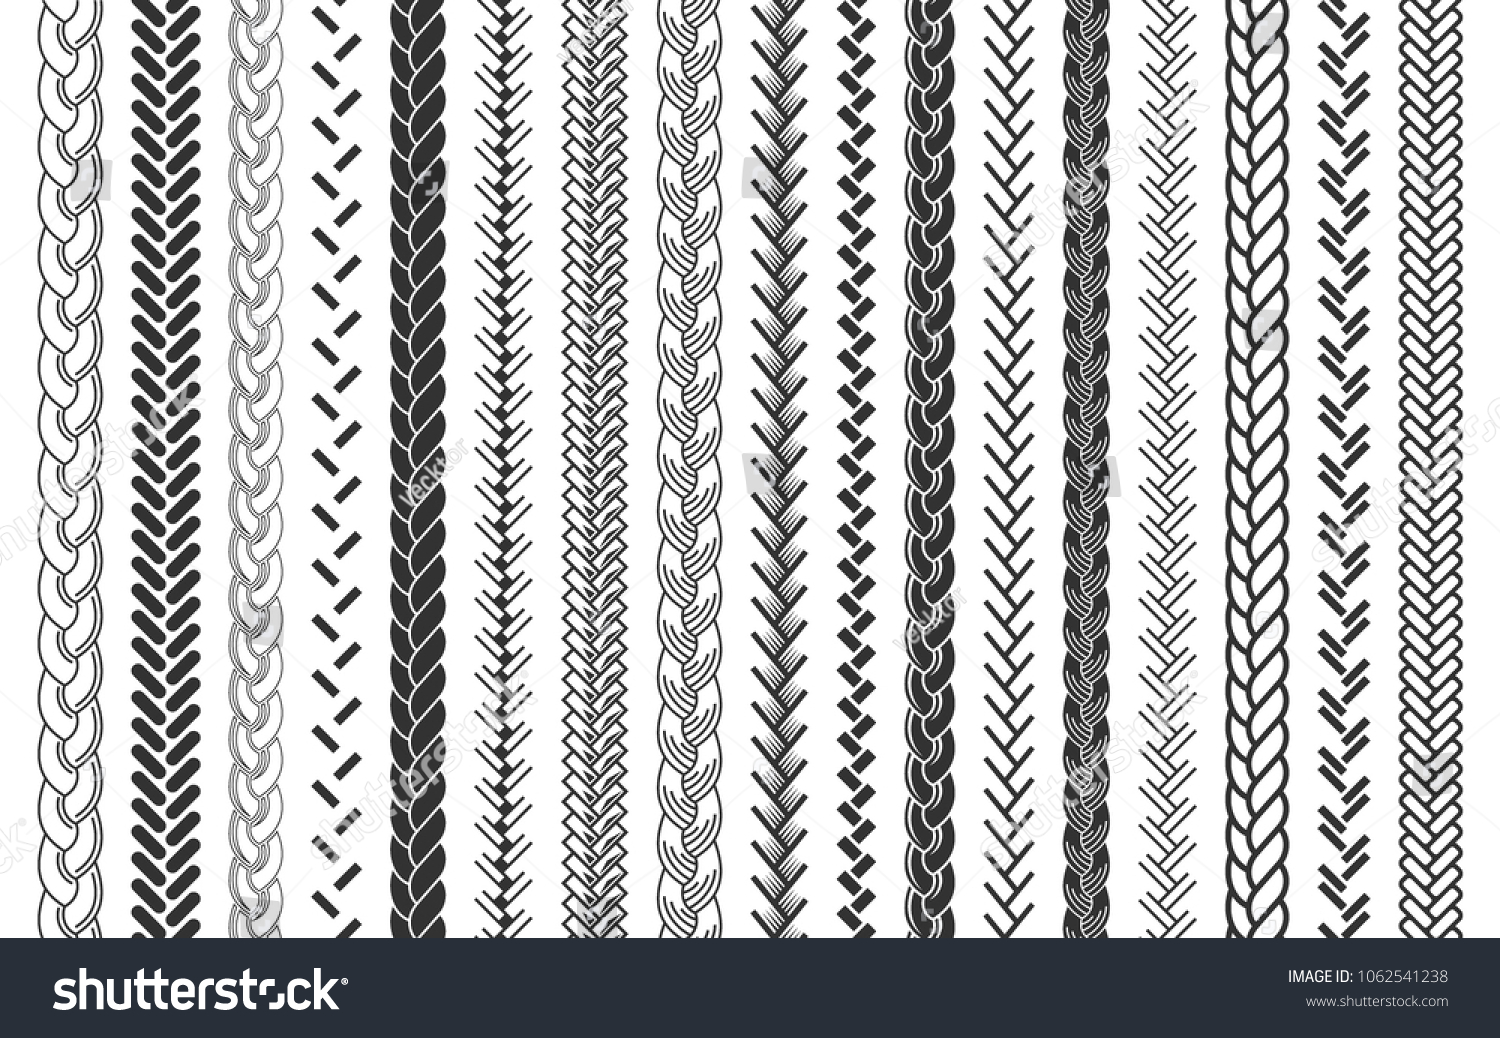 Plait and braids pattern brush set of braided ropes vector illustration #1062541238